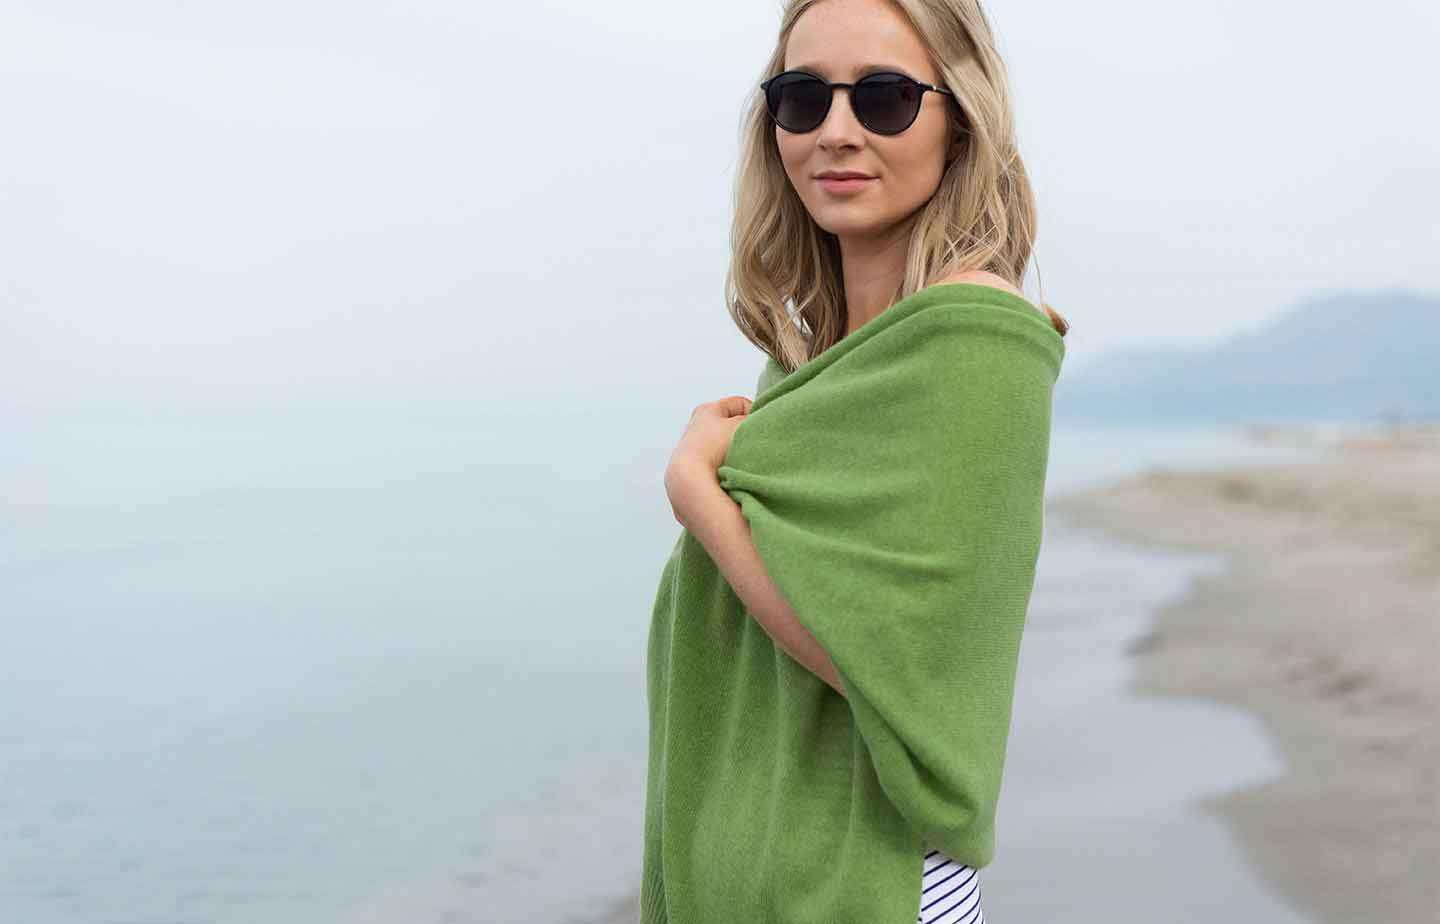 Women-standing-on-a-beach-with-blue-sky-in-the-background-wearing-sunglasses-and-clutching-a-green-cashmere-wrap-around-her-shoulders